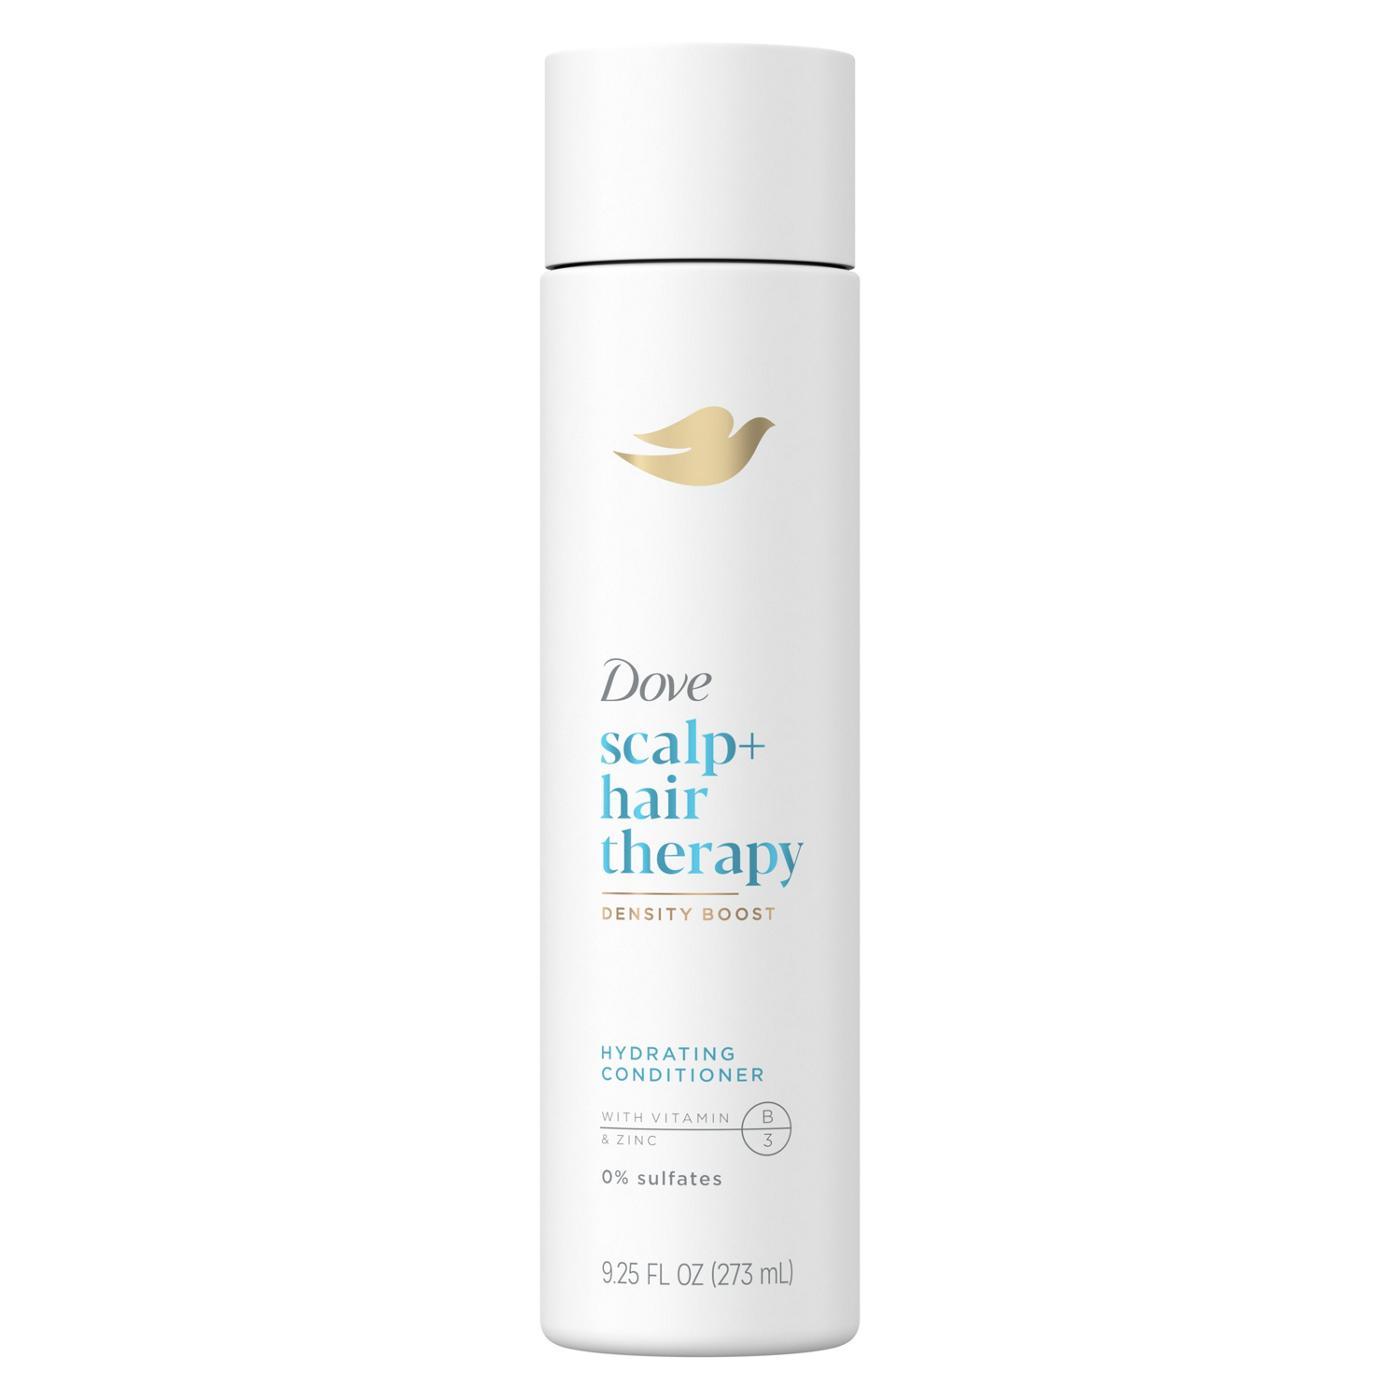 Dove Scalp+ Hair Therapy Hydrating Conditioner; image 1 of 4